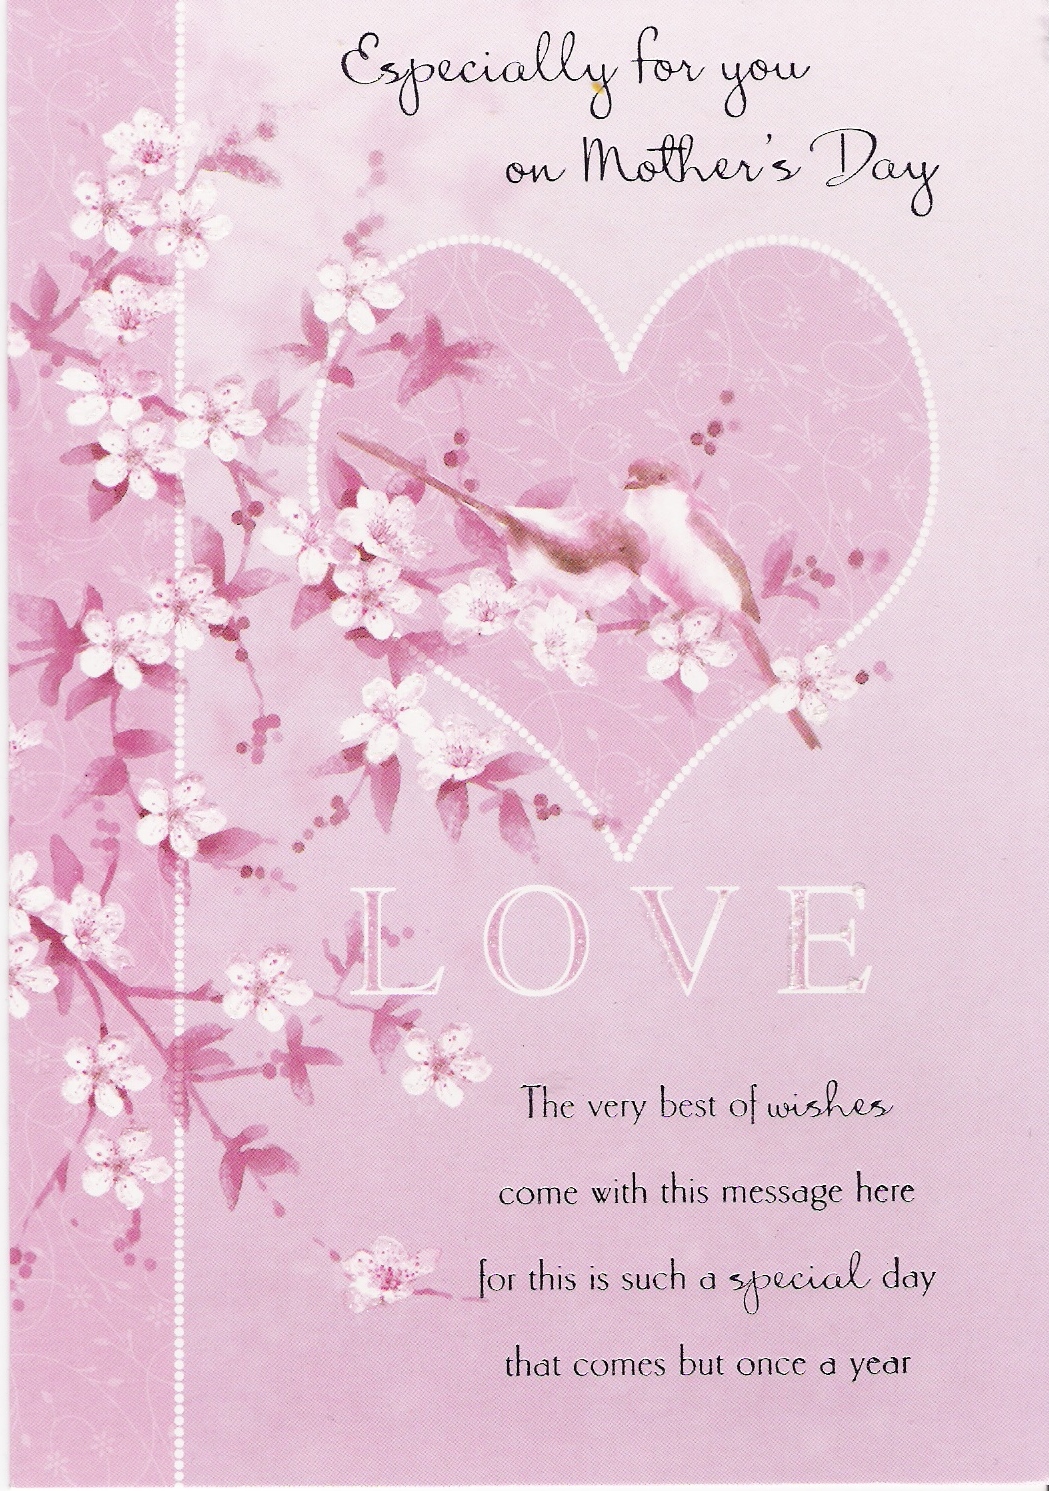 Mothers day Cards 2013 - Love and wishes cards ~ Mothers Day 2013